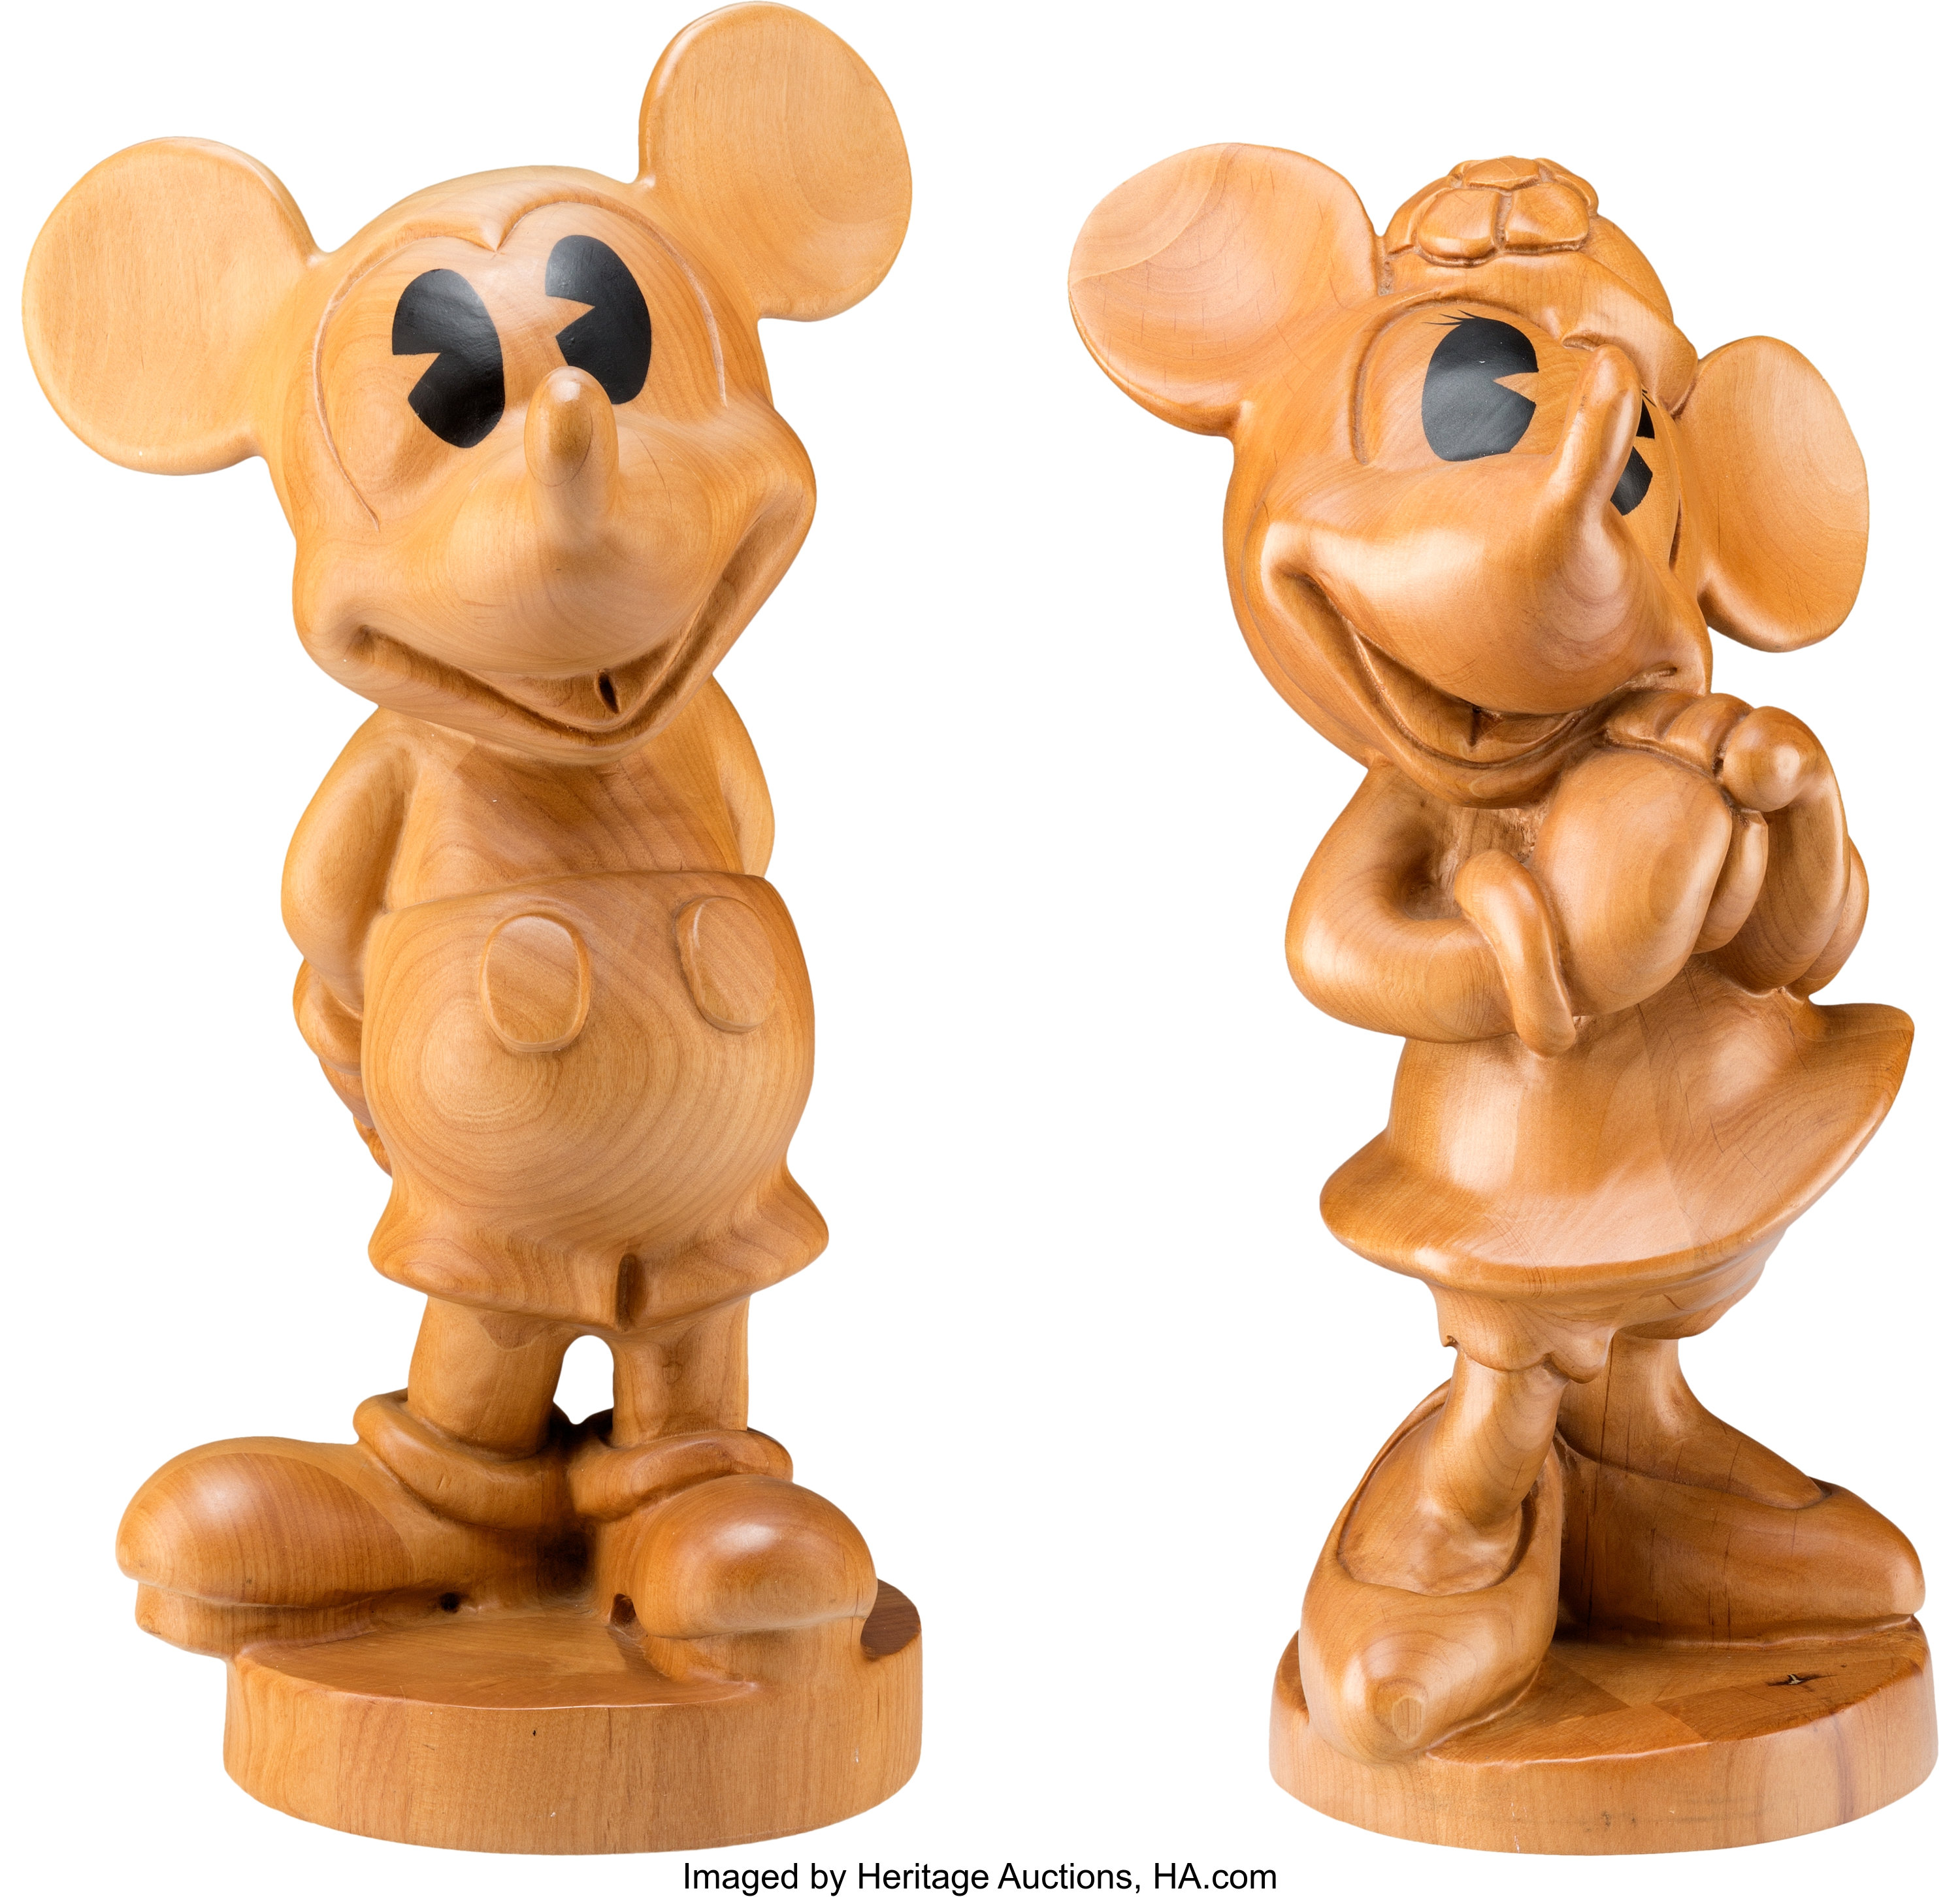 The Art of Mickey and Minnie Mouse in 3-D